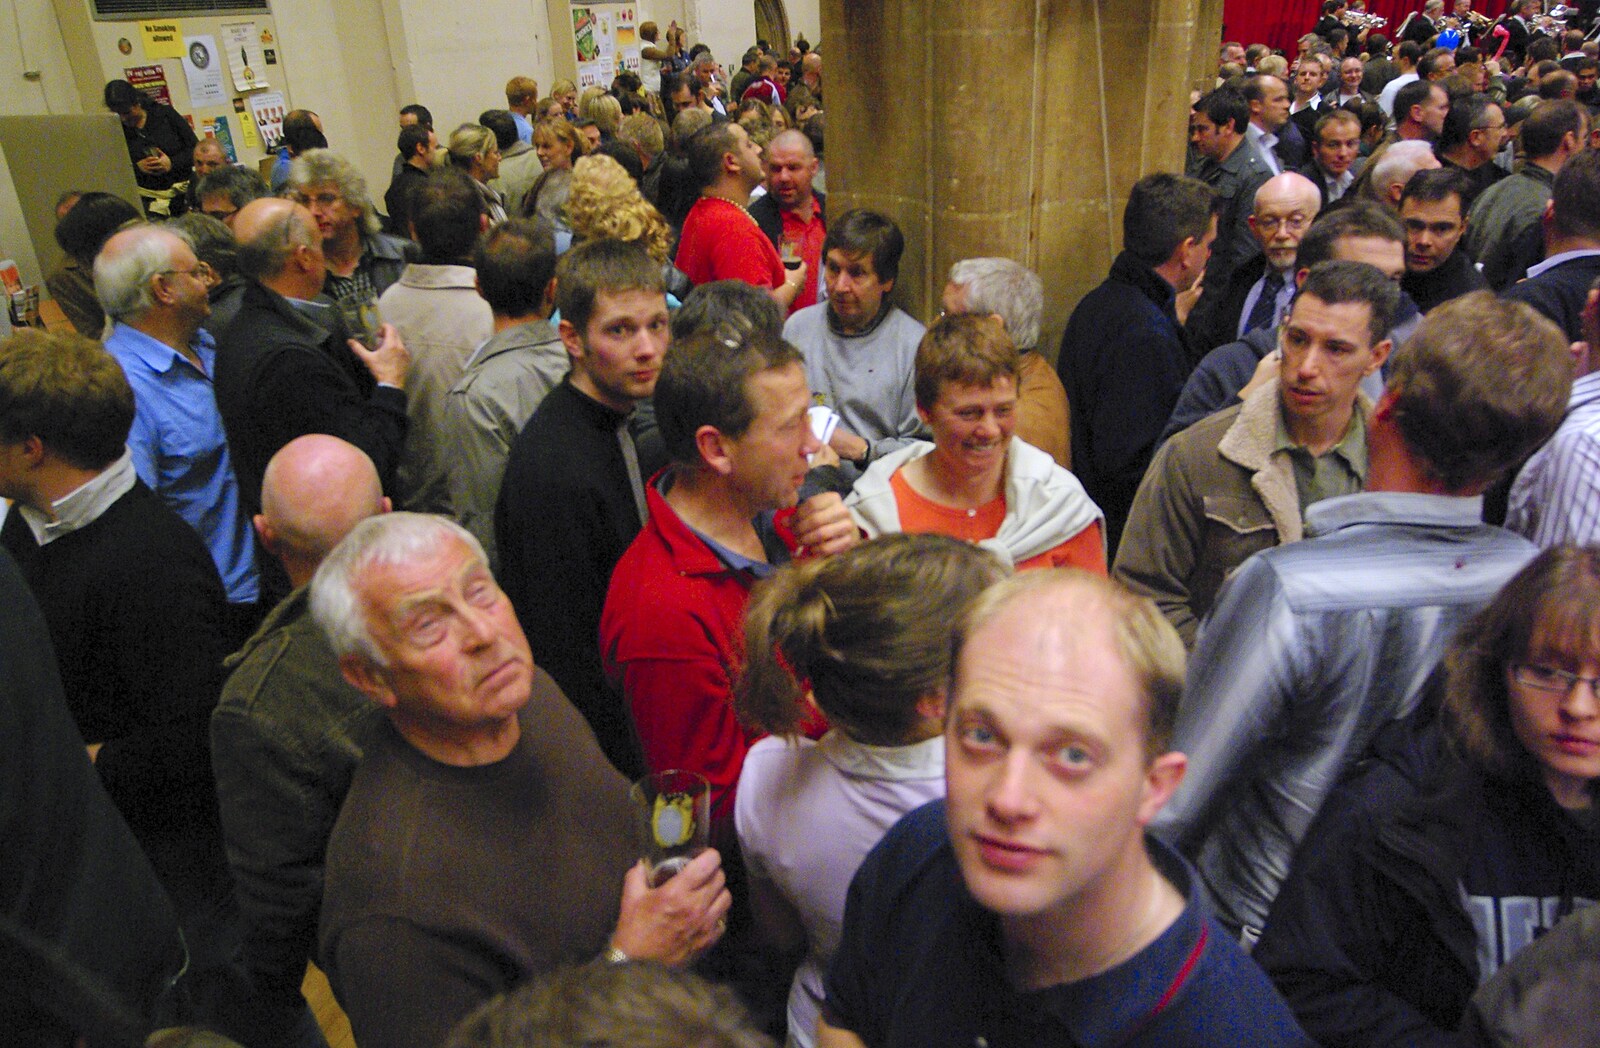 The 30th Norwich Beer Festival, St. Andrew's Hall, Norfolk - 24th October 2007: Colin, Paul and the gang mingle around, drinking ales